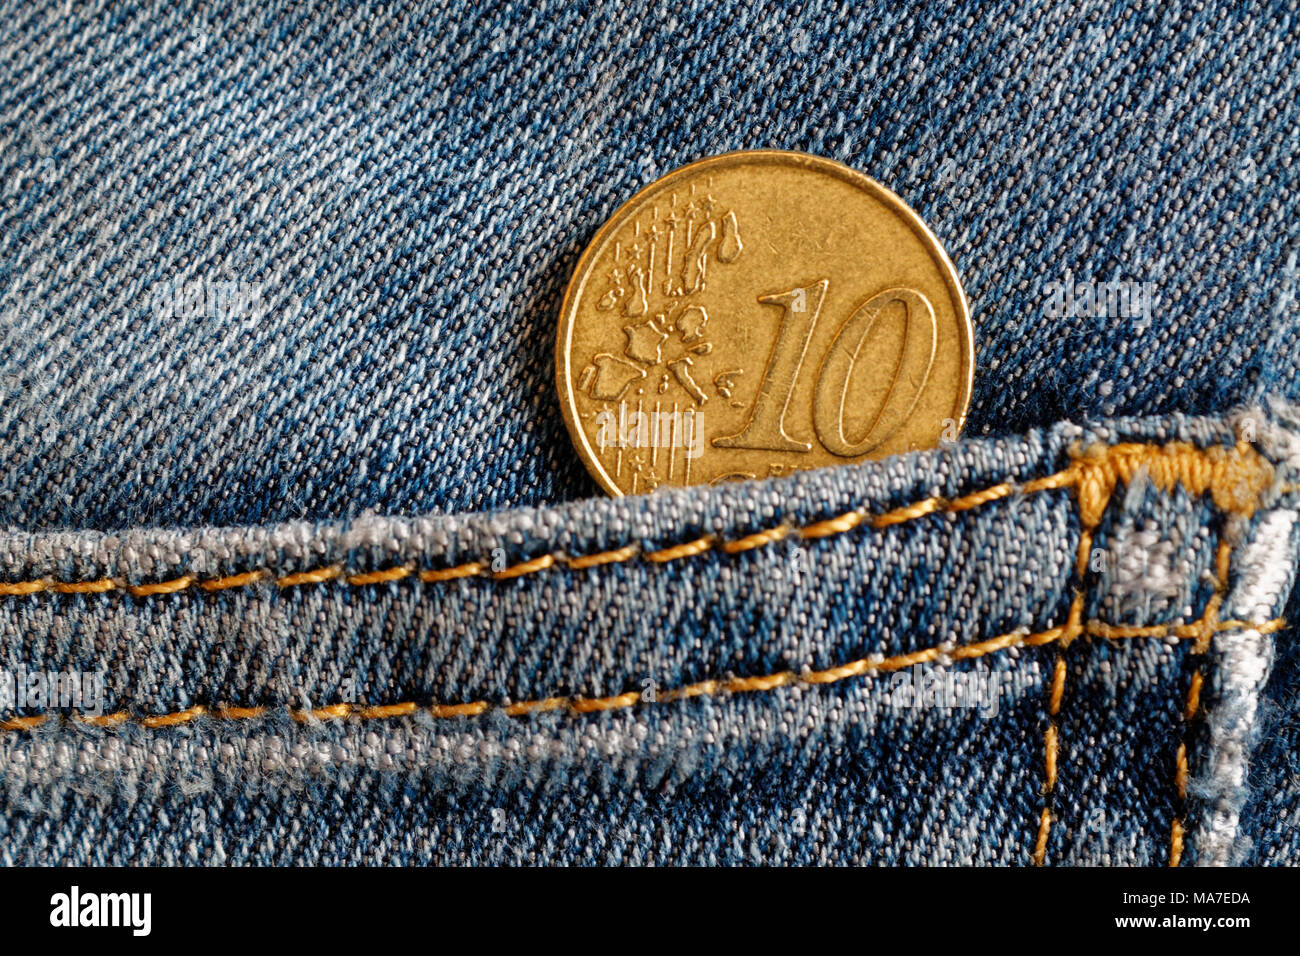 Euro coin with a denomination of 10 euro cents in the pocket of worn blue denim jeans Stock Photo